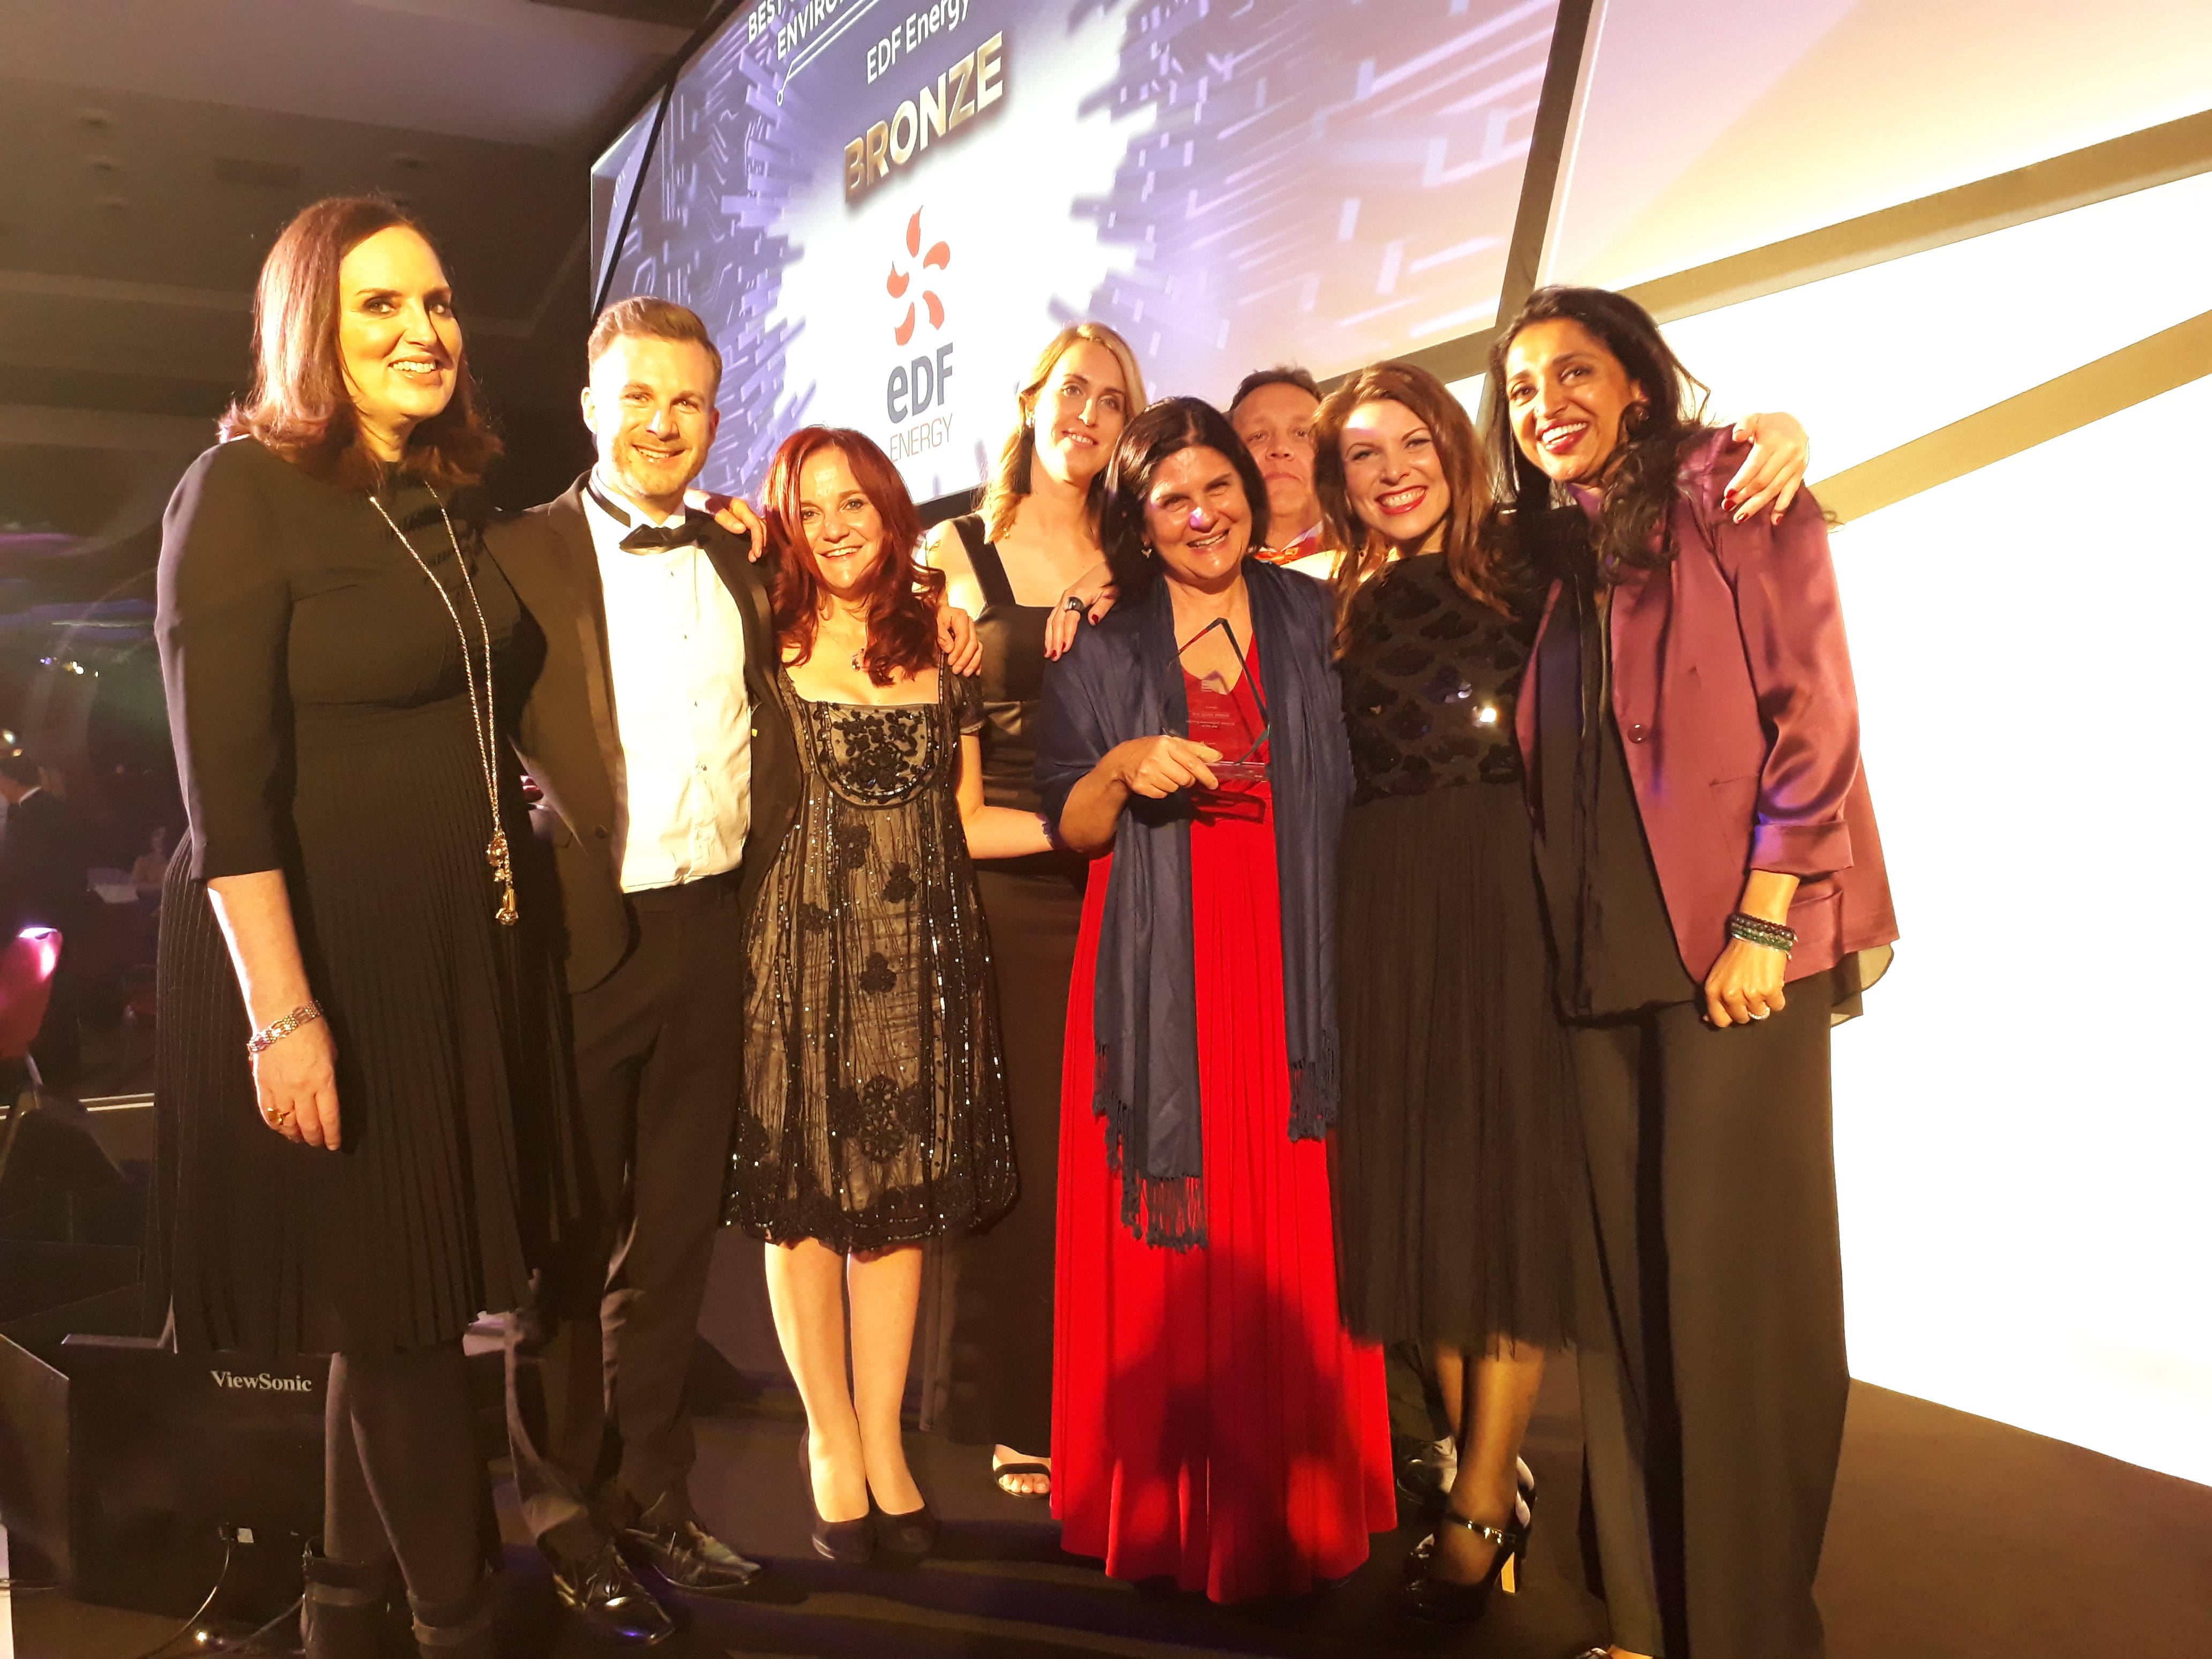 Sponge's founder and managing director, Louise Pasterfield, collects silver award for Learning Technologies Company of the Year